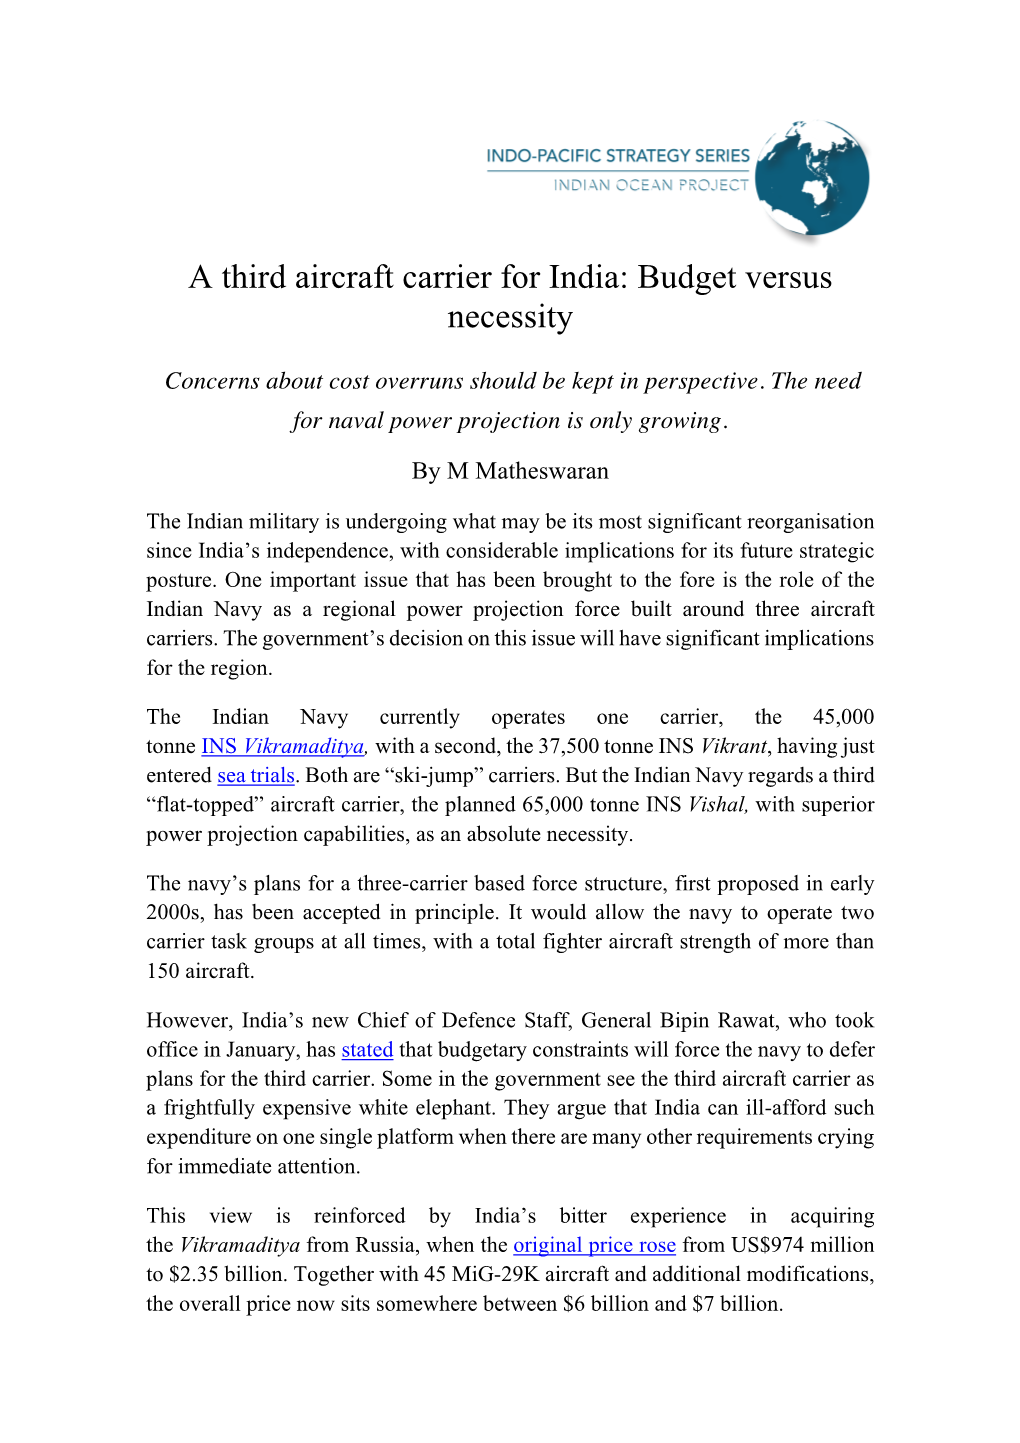 A Third Aircraft Carrier for India: Budget Versus Necessity